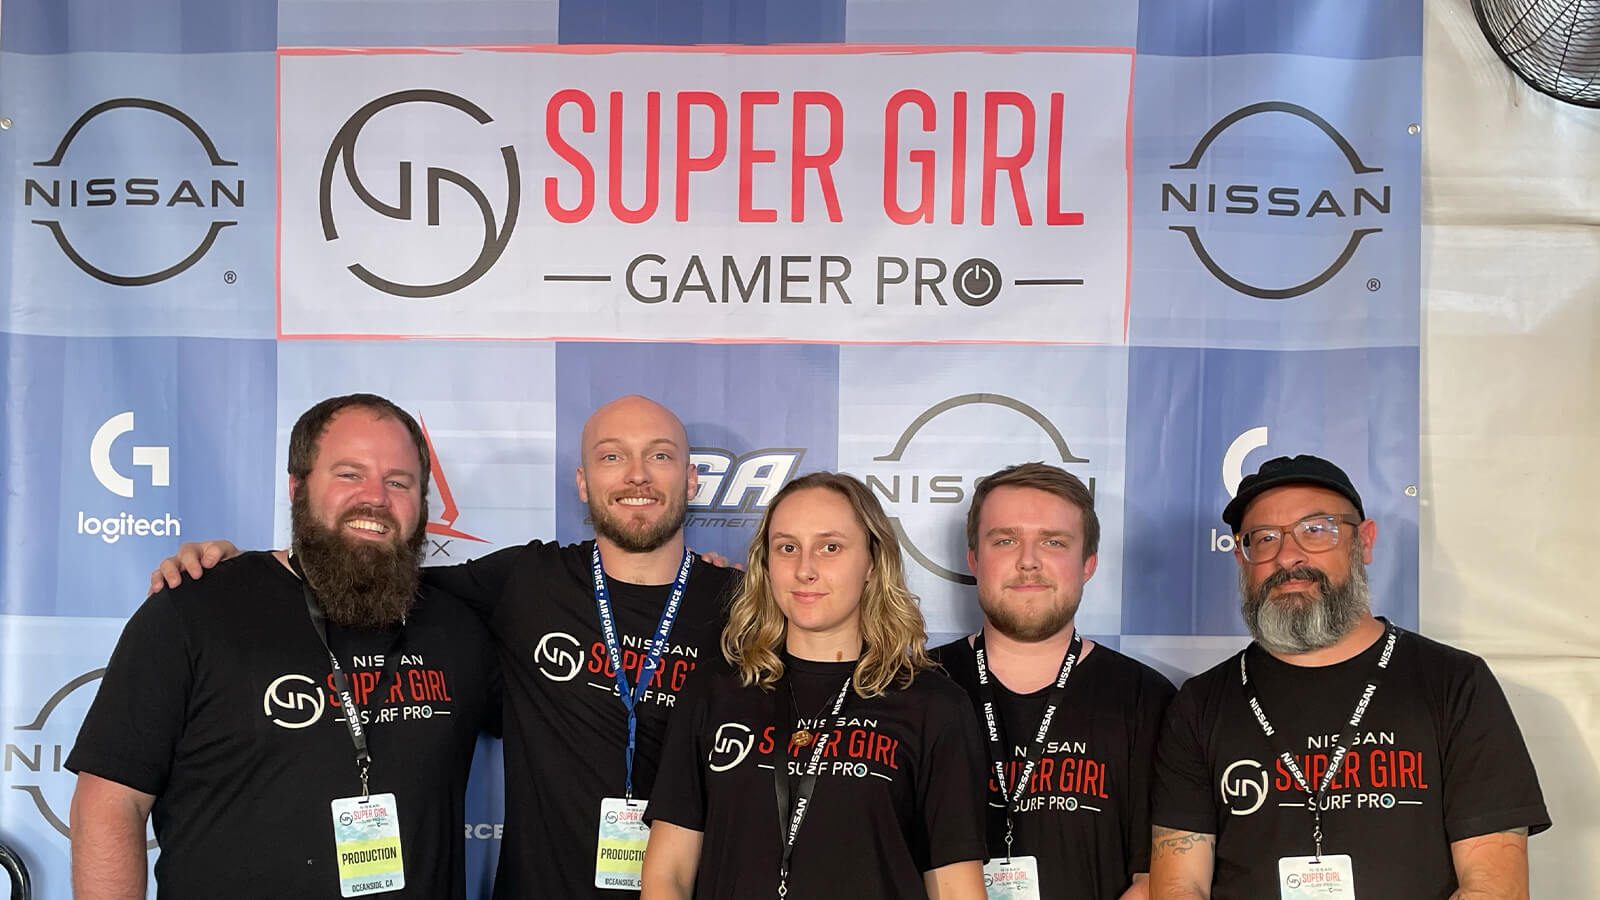 Five people wearing black shirts and badges that read "production" while standing in front of a step and repeat featuring the Super Girl Gamer pro logo and event sponsor logos.